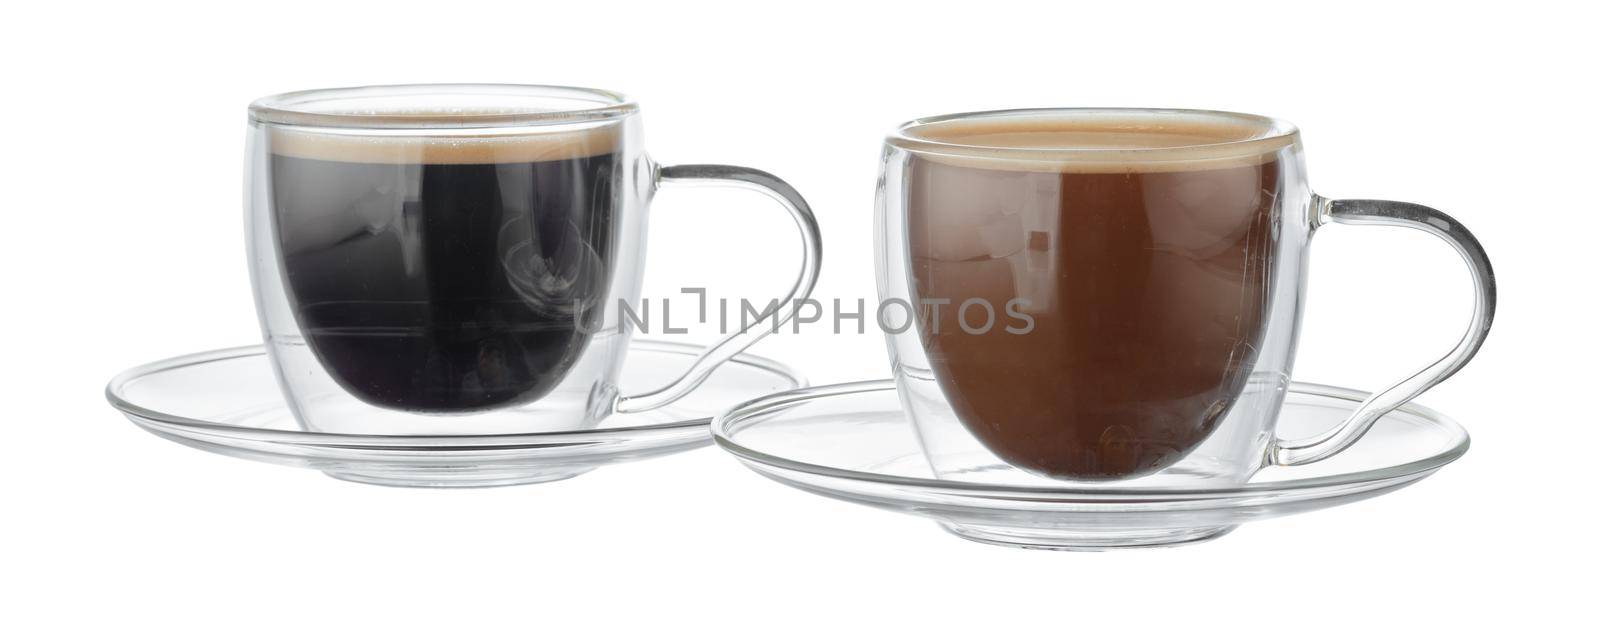 Glass cup of coffee isolated on white by Fabrikasimf